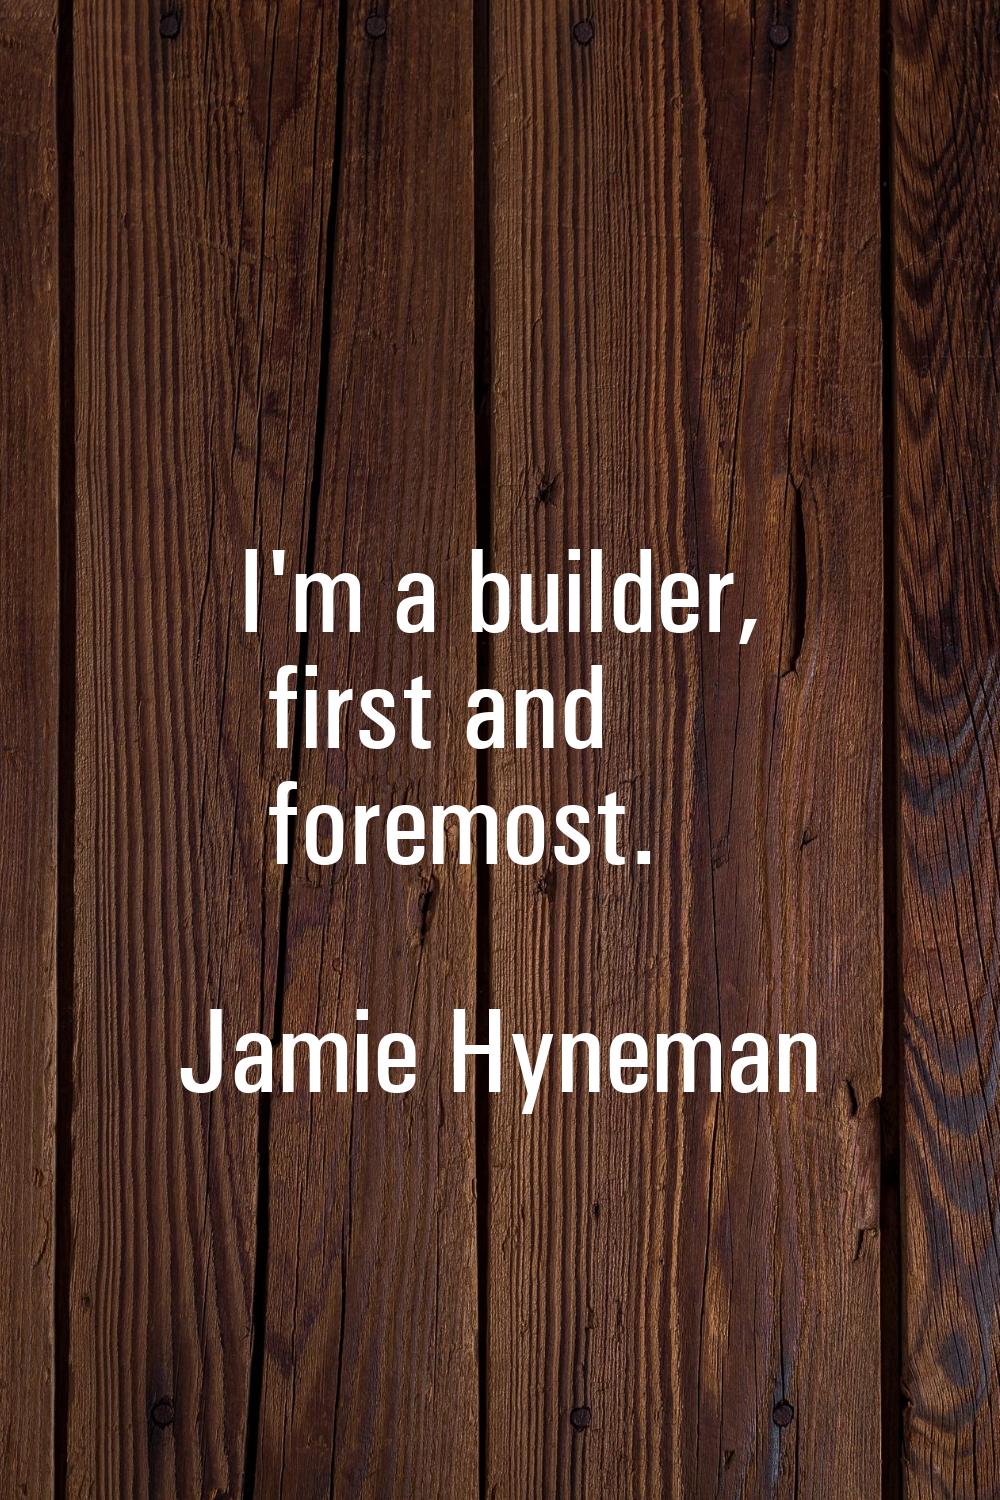 I'm a builder, first and foremost.